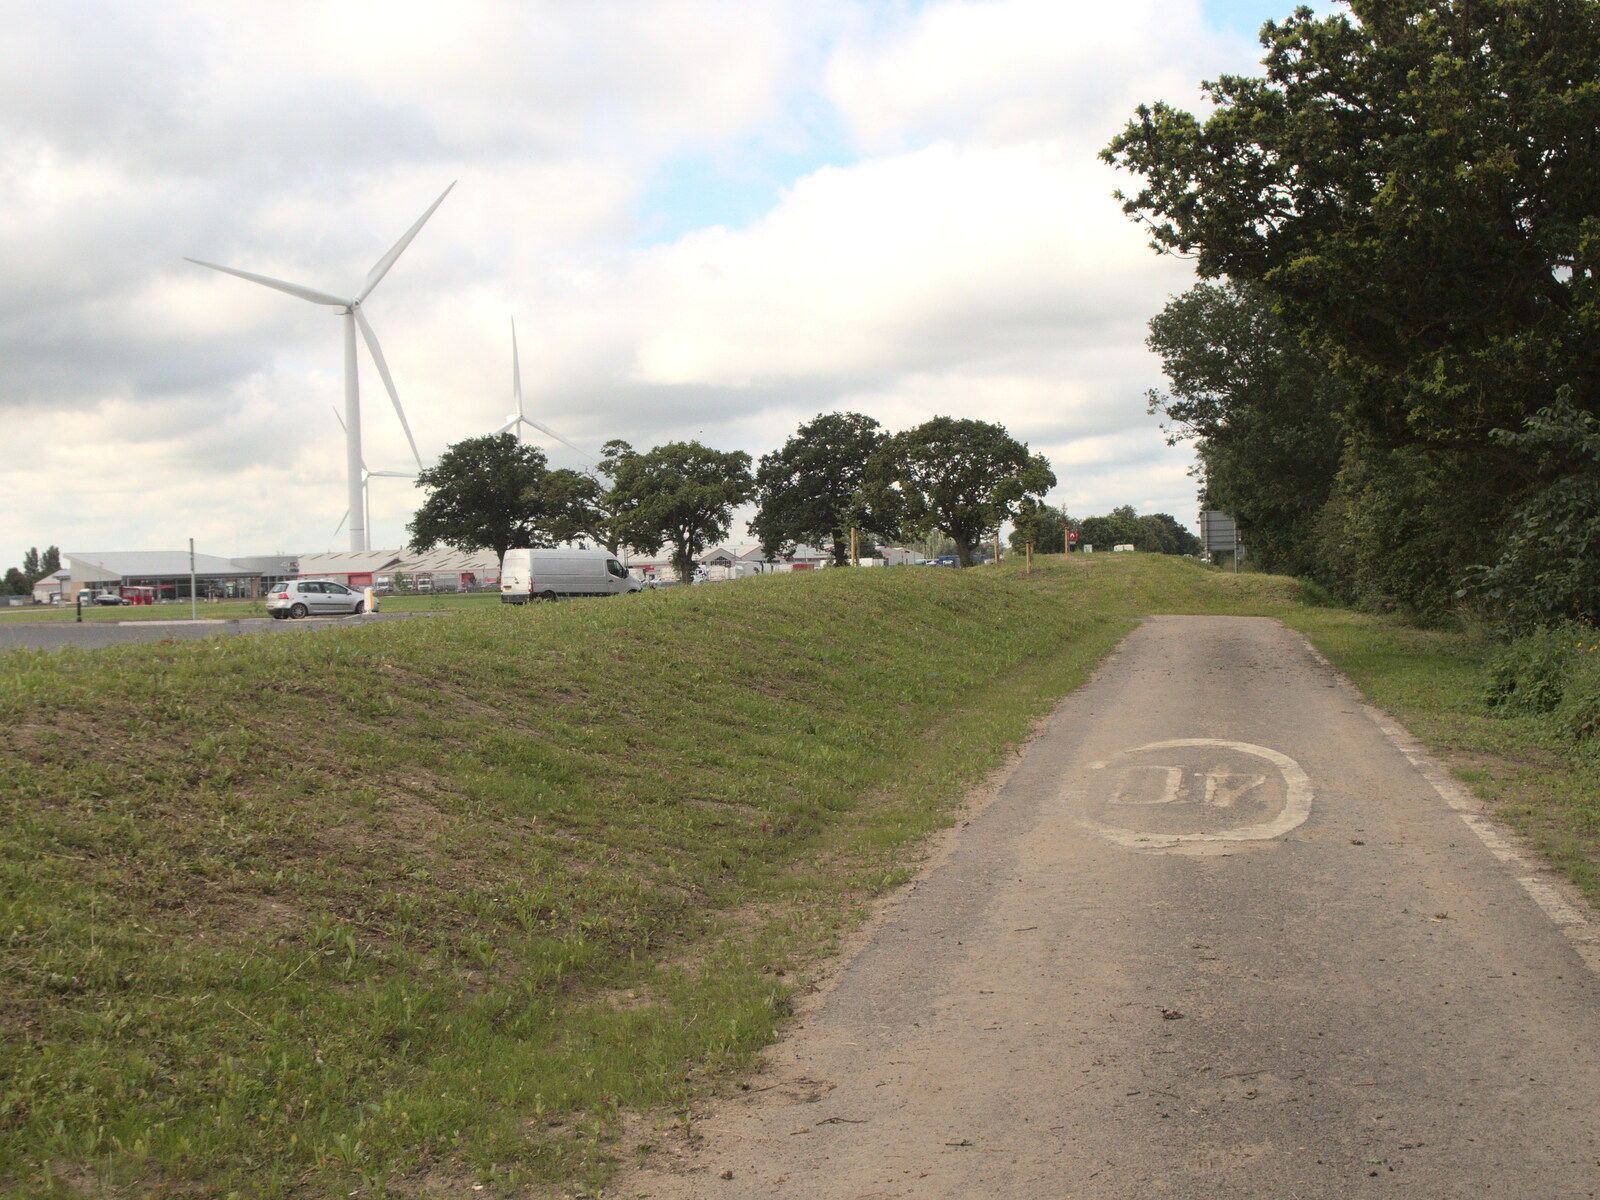 A ghost section of the old A140 from Hares, Tortoises and Station 119, Eye, Suffolk - 19th July 2021